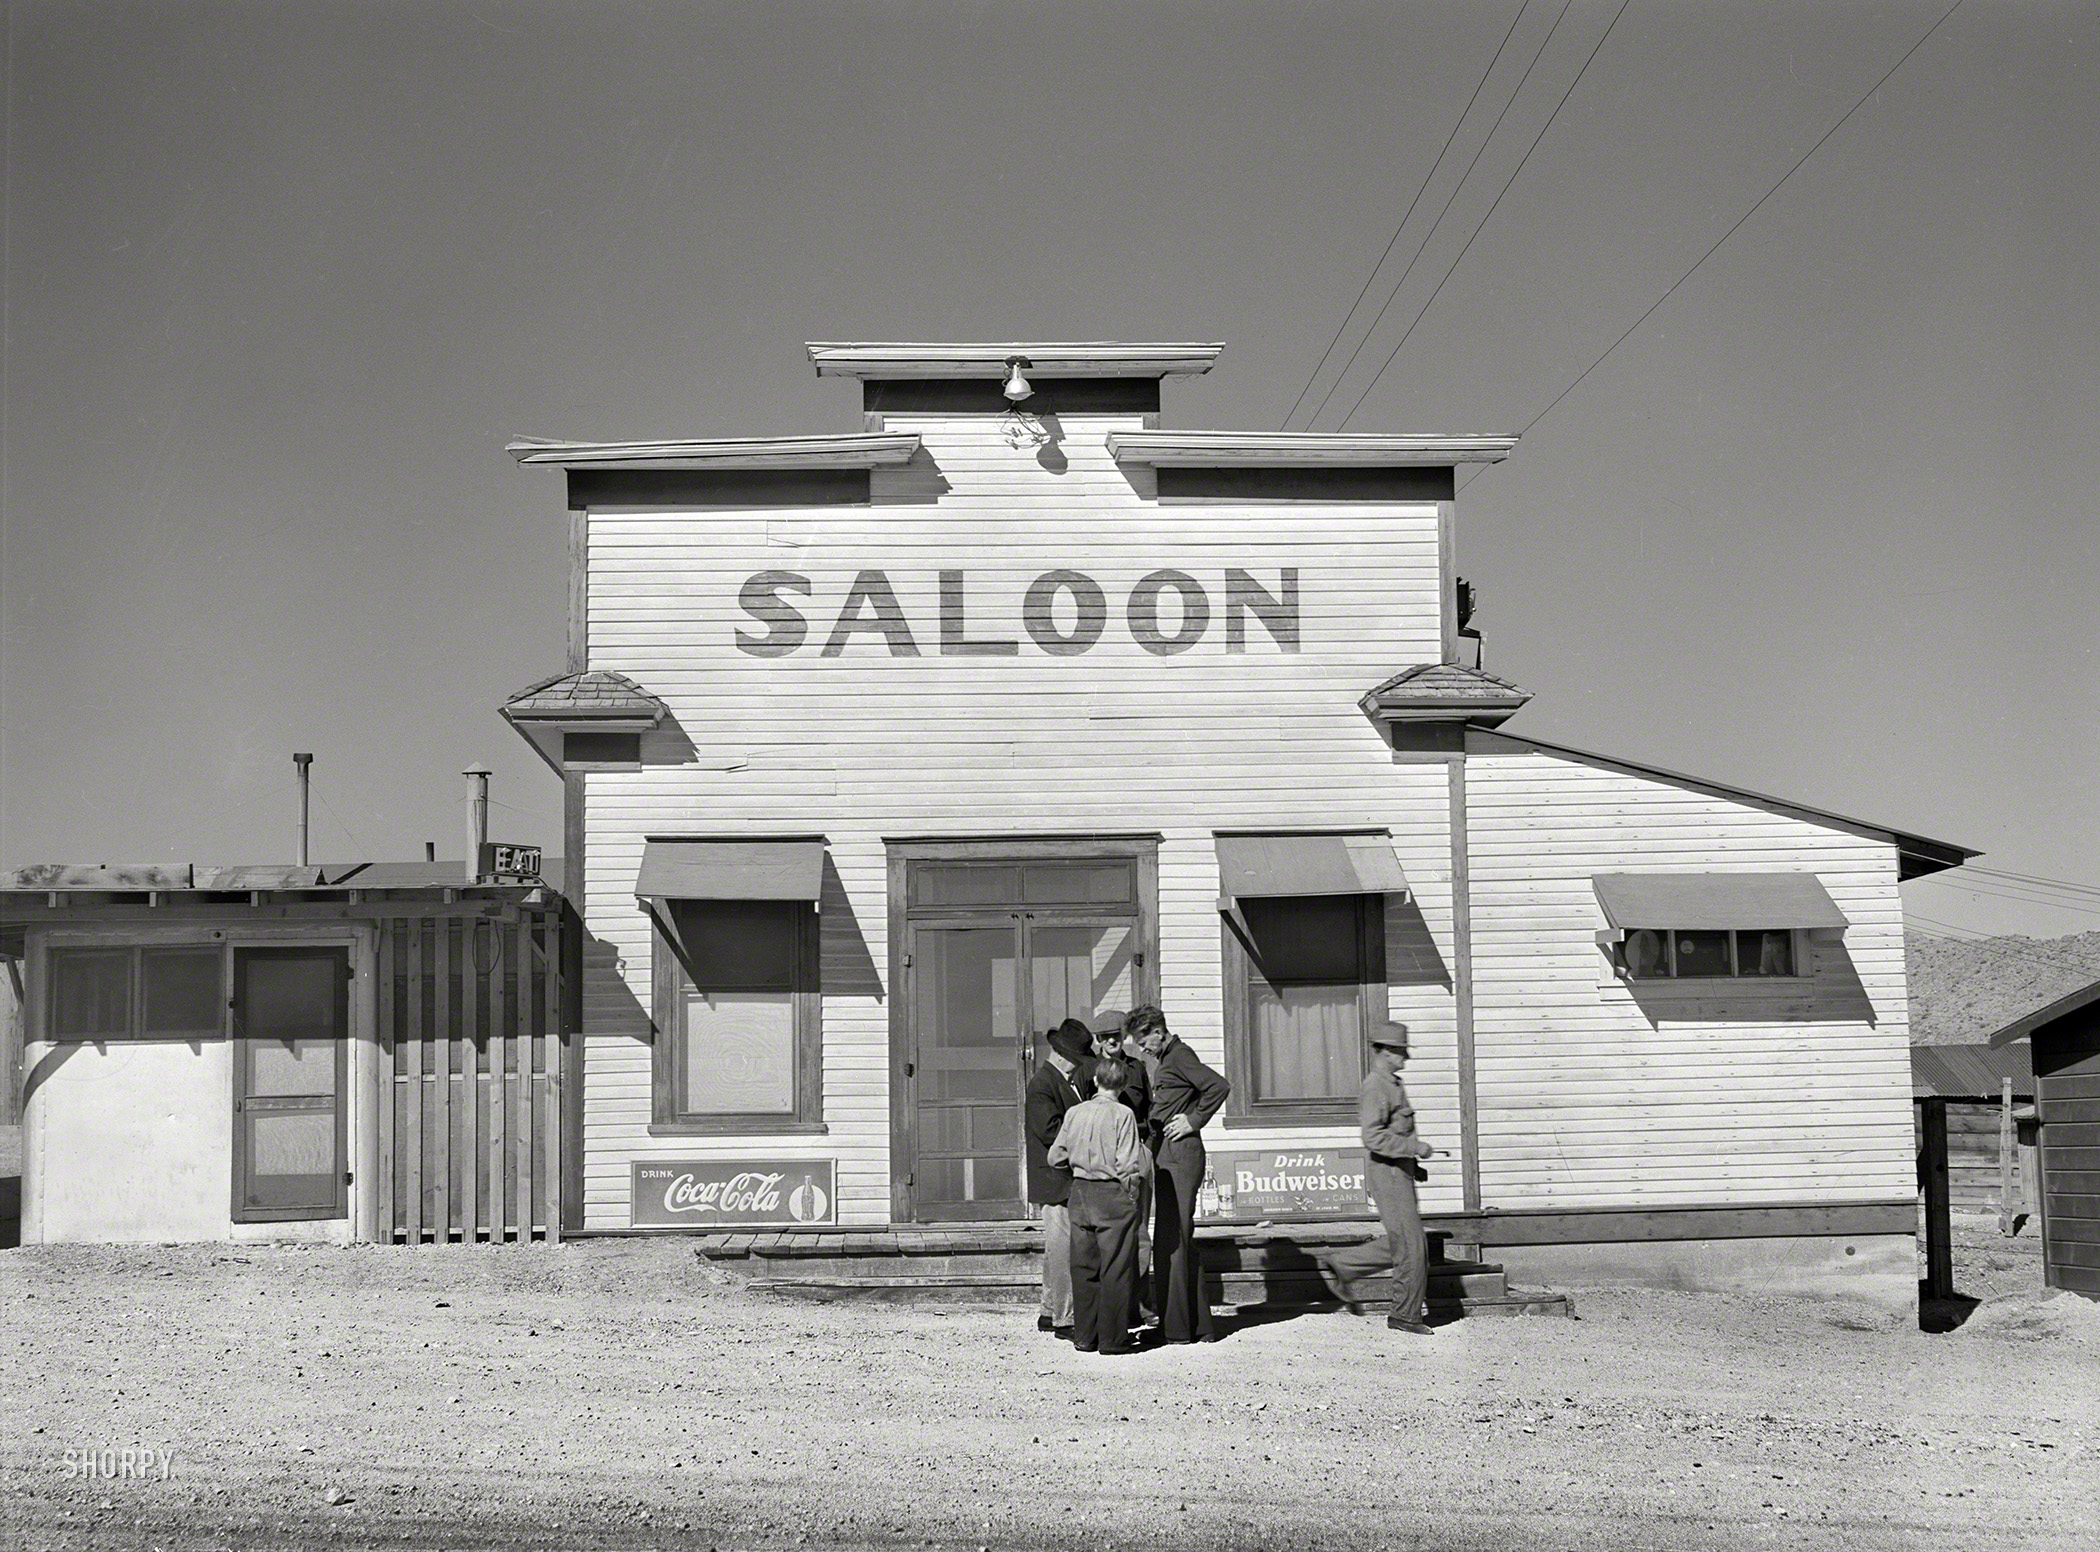 March 1940. "Saloon. Silver Peak, Esmeralda County, Nevada." Photo by Arthur Rothstein for the Farm Security Administration. View full size.